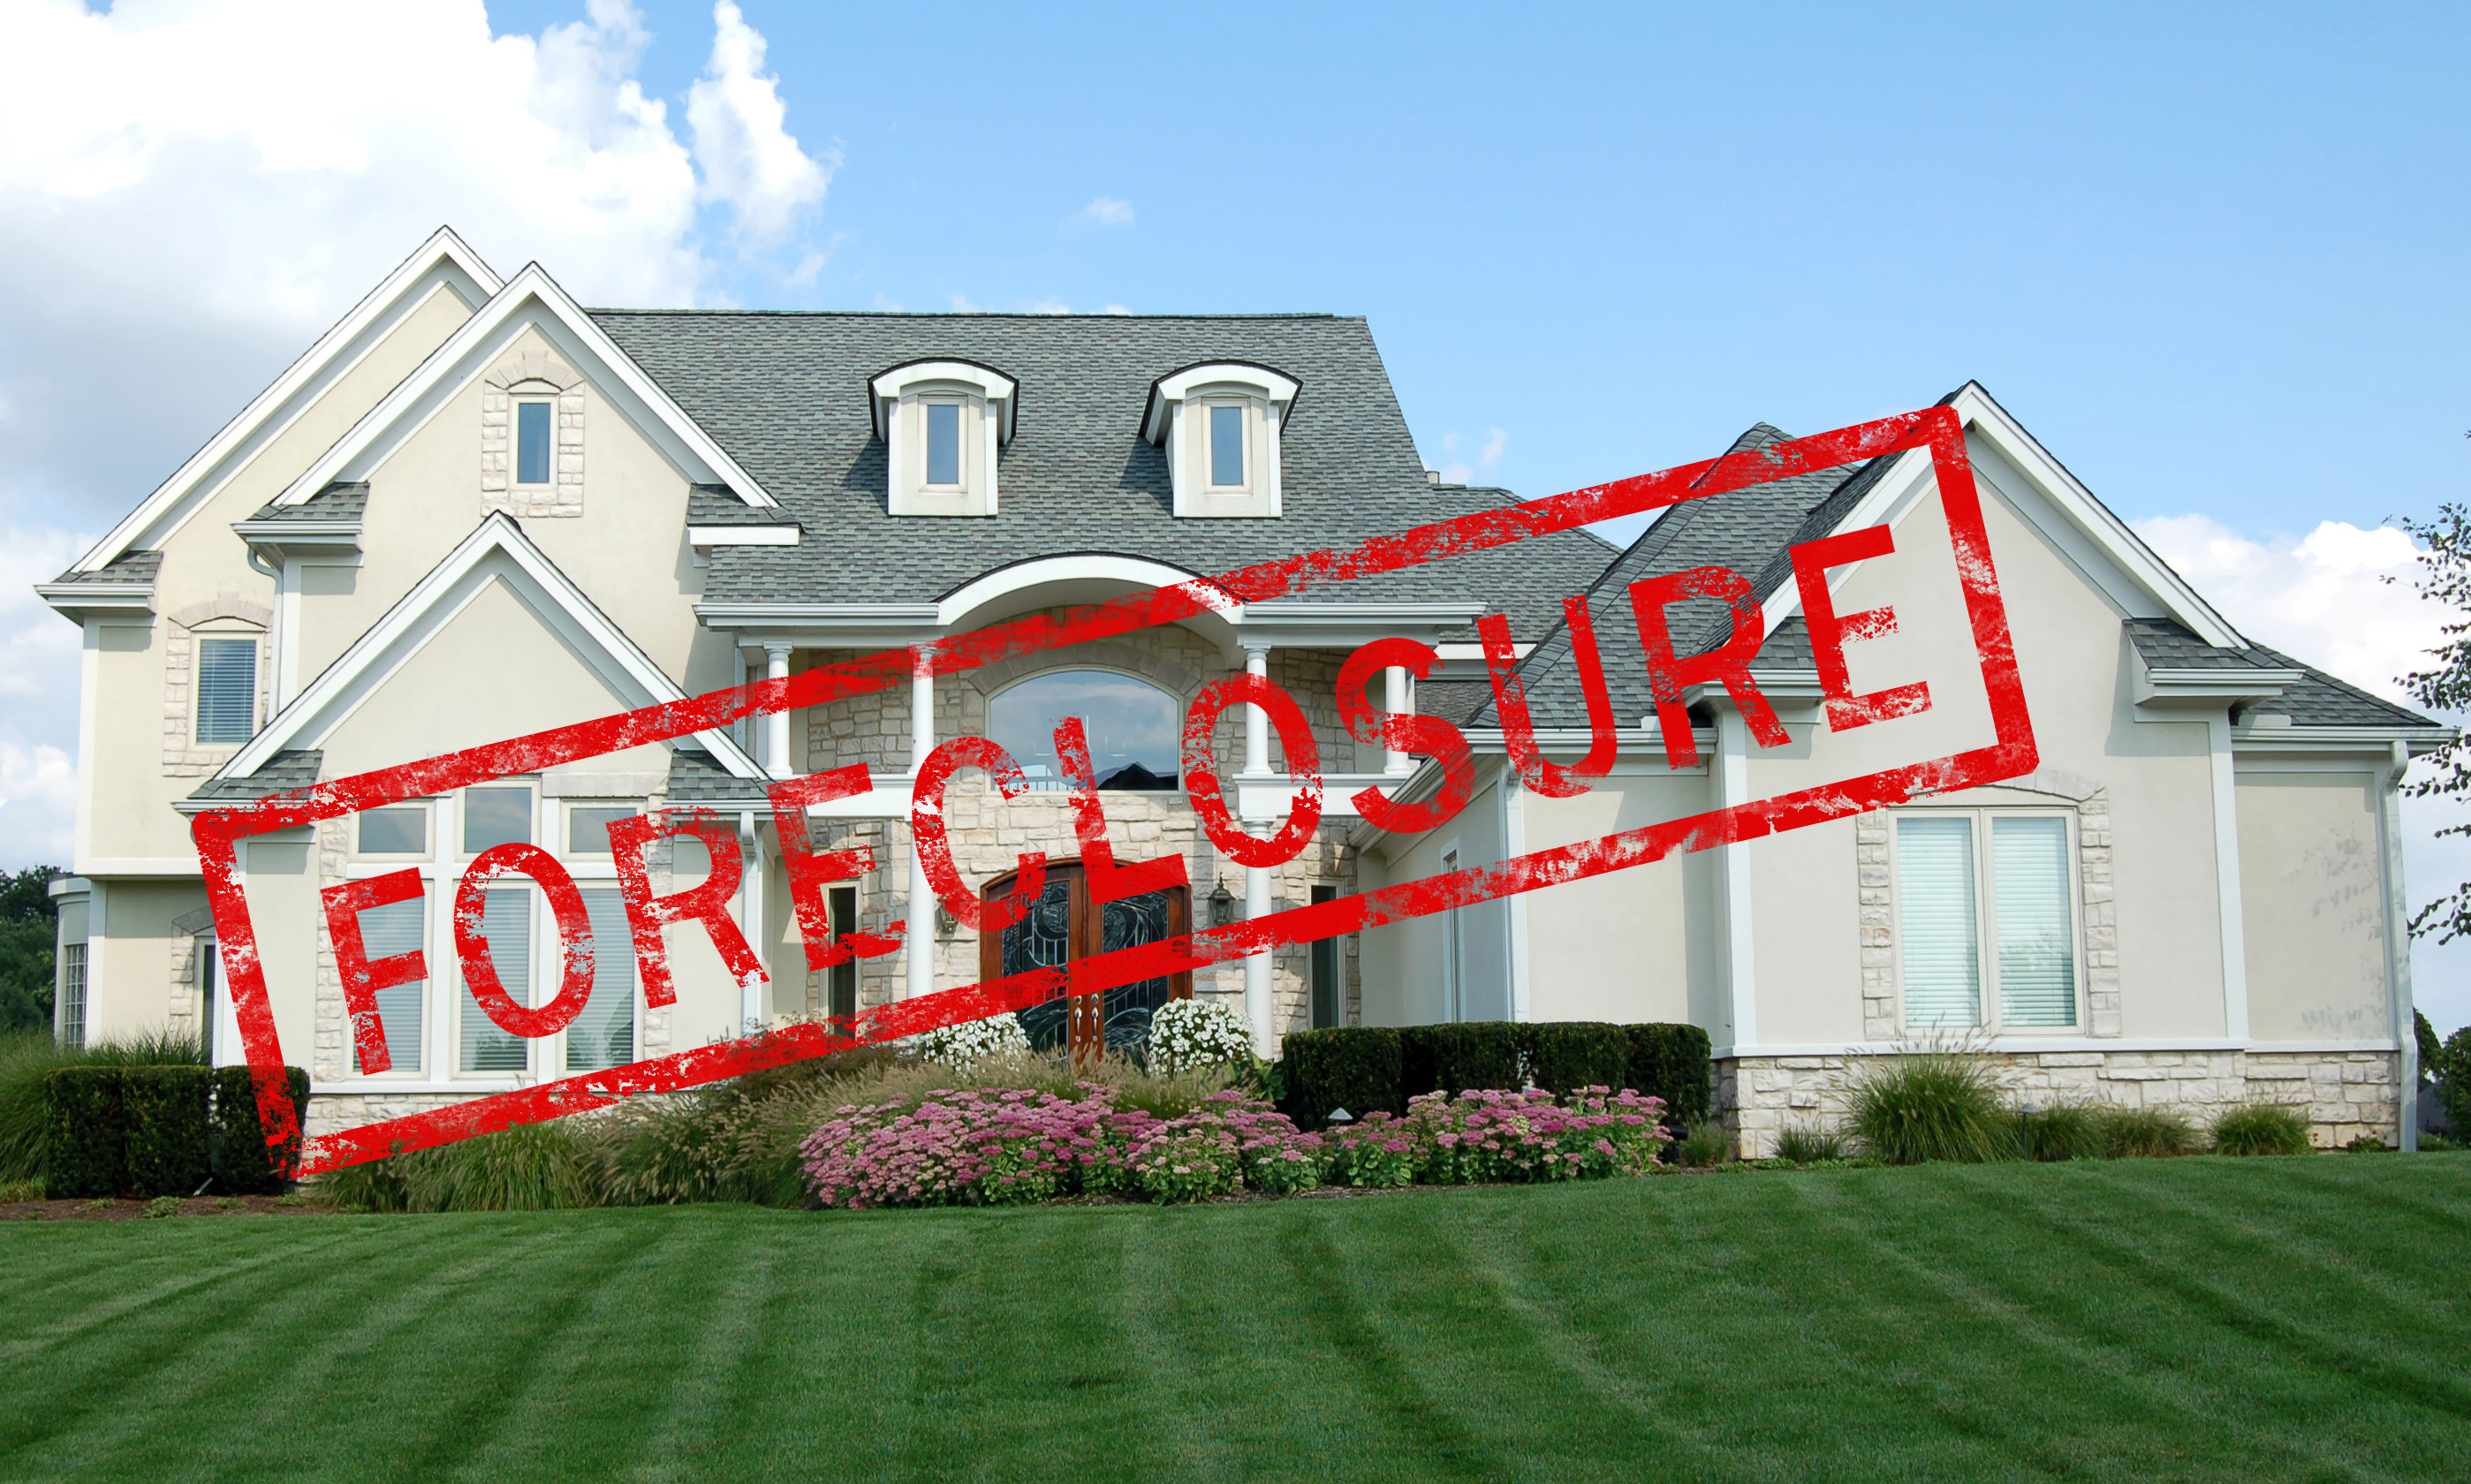 Call Vinson Real Estate Services, LLC when you need appraisals for Montgomery foreclosures